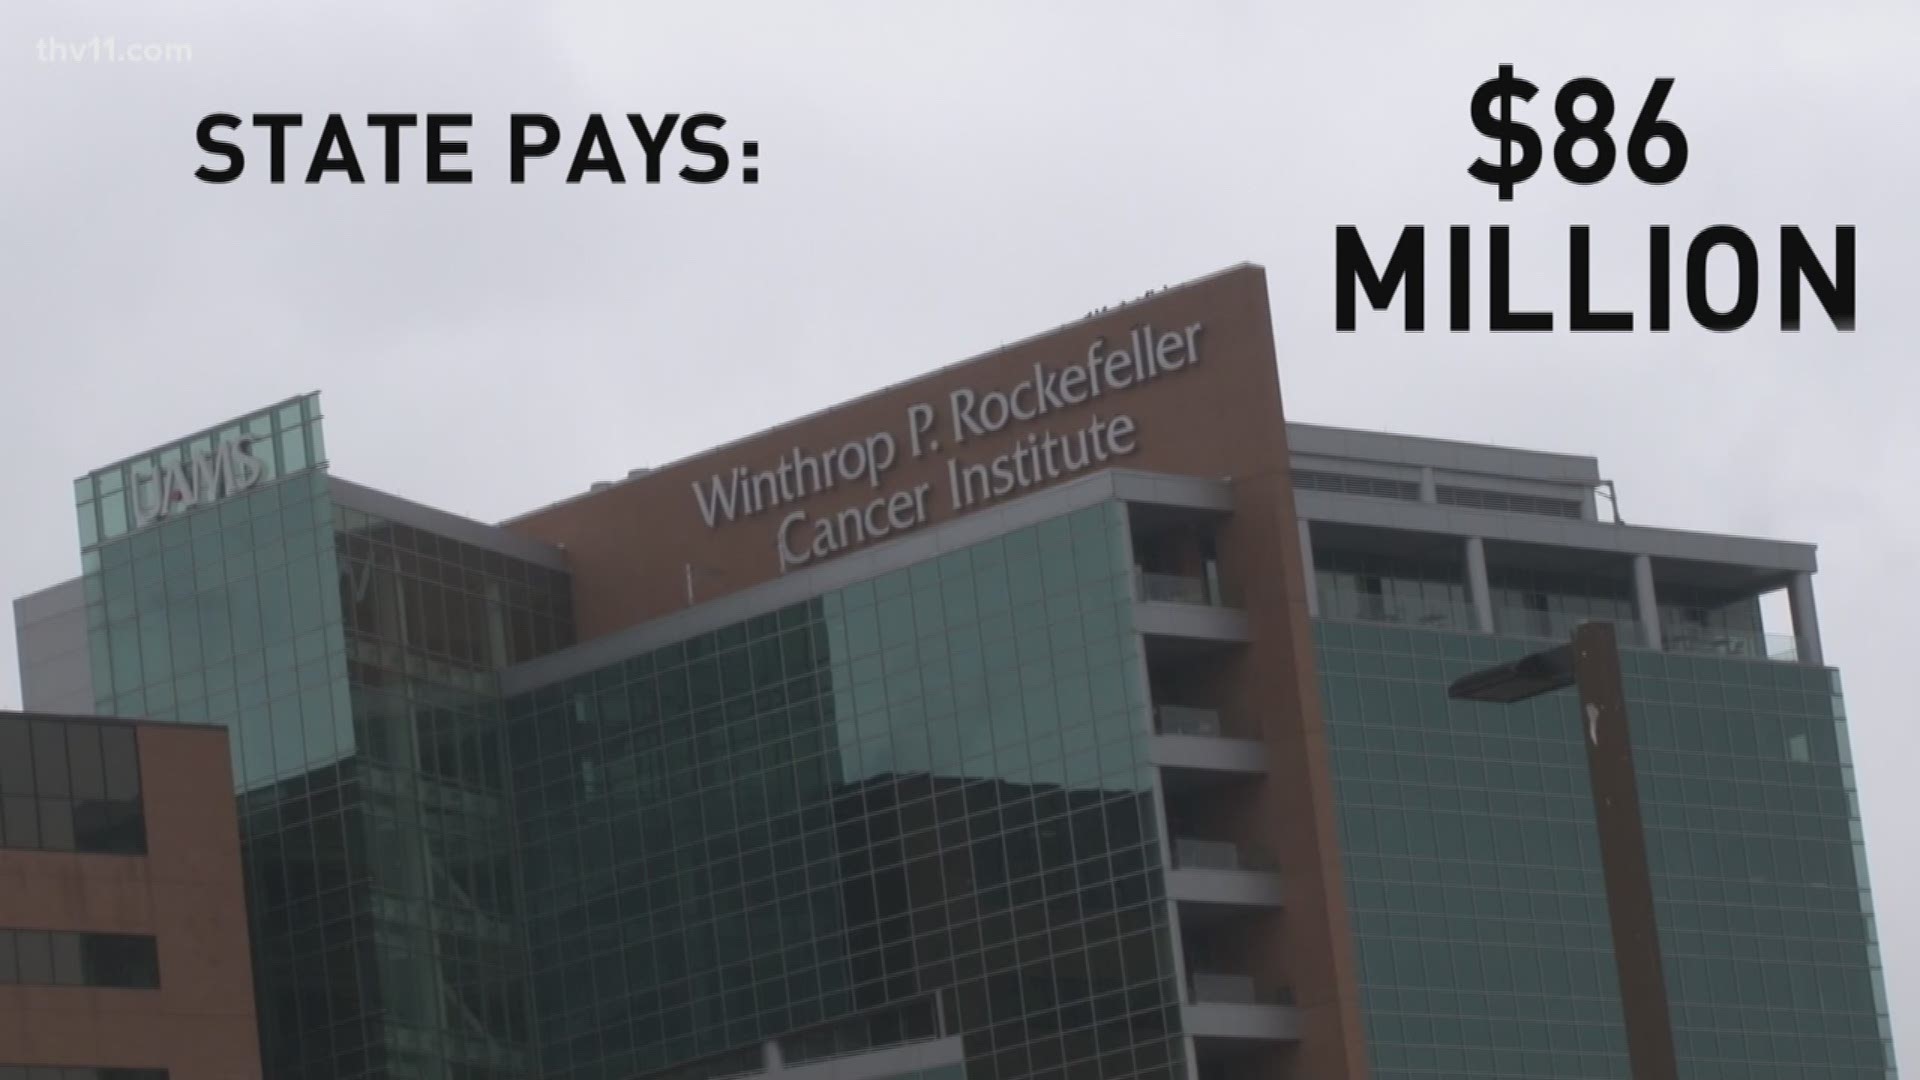 Payroll cuts were used to offset a budget deficit at the hospital system.